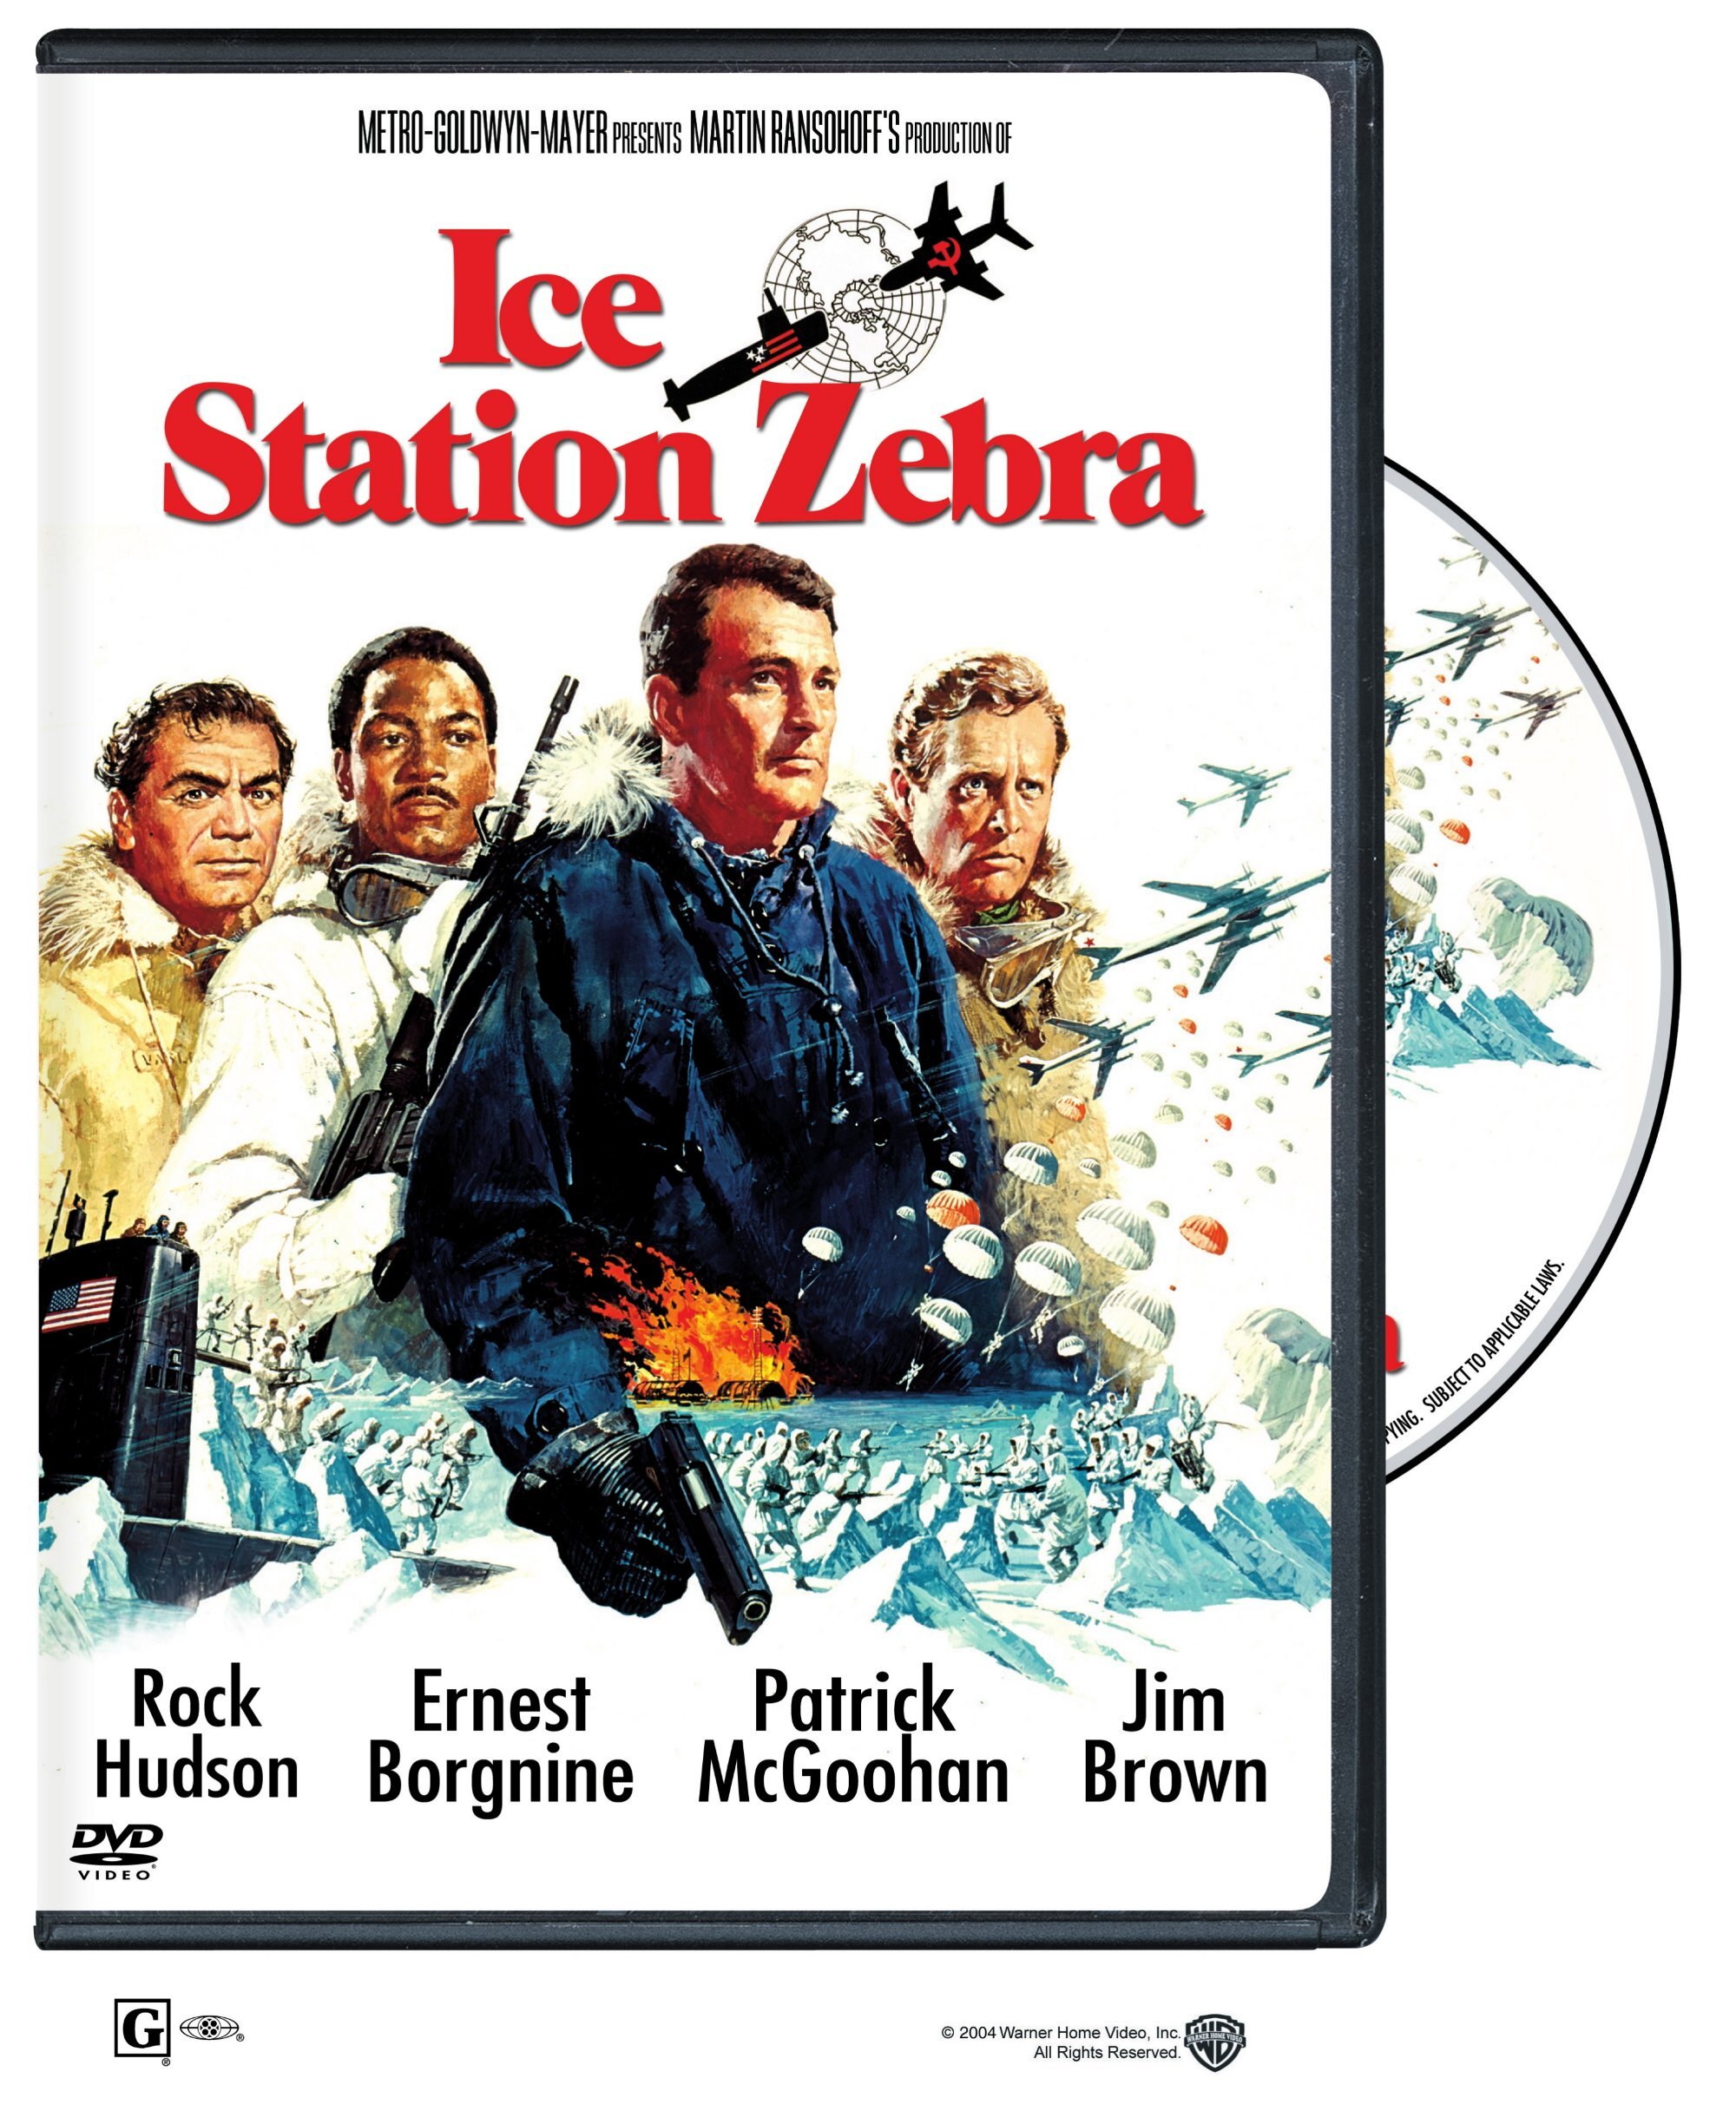 Ice Station Zebra (DVD Widescreen) - DVD [ 1968 ]  - Modern Classic Movies On DVD - Movies On GRUV